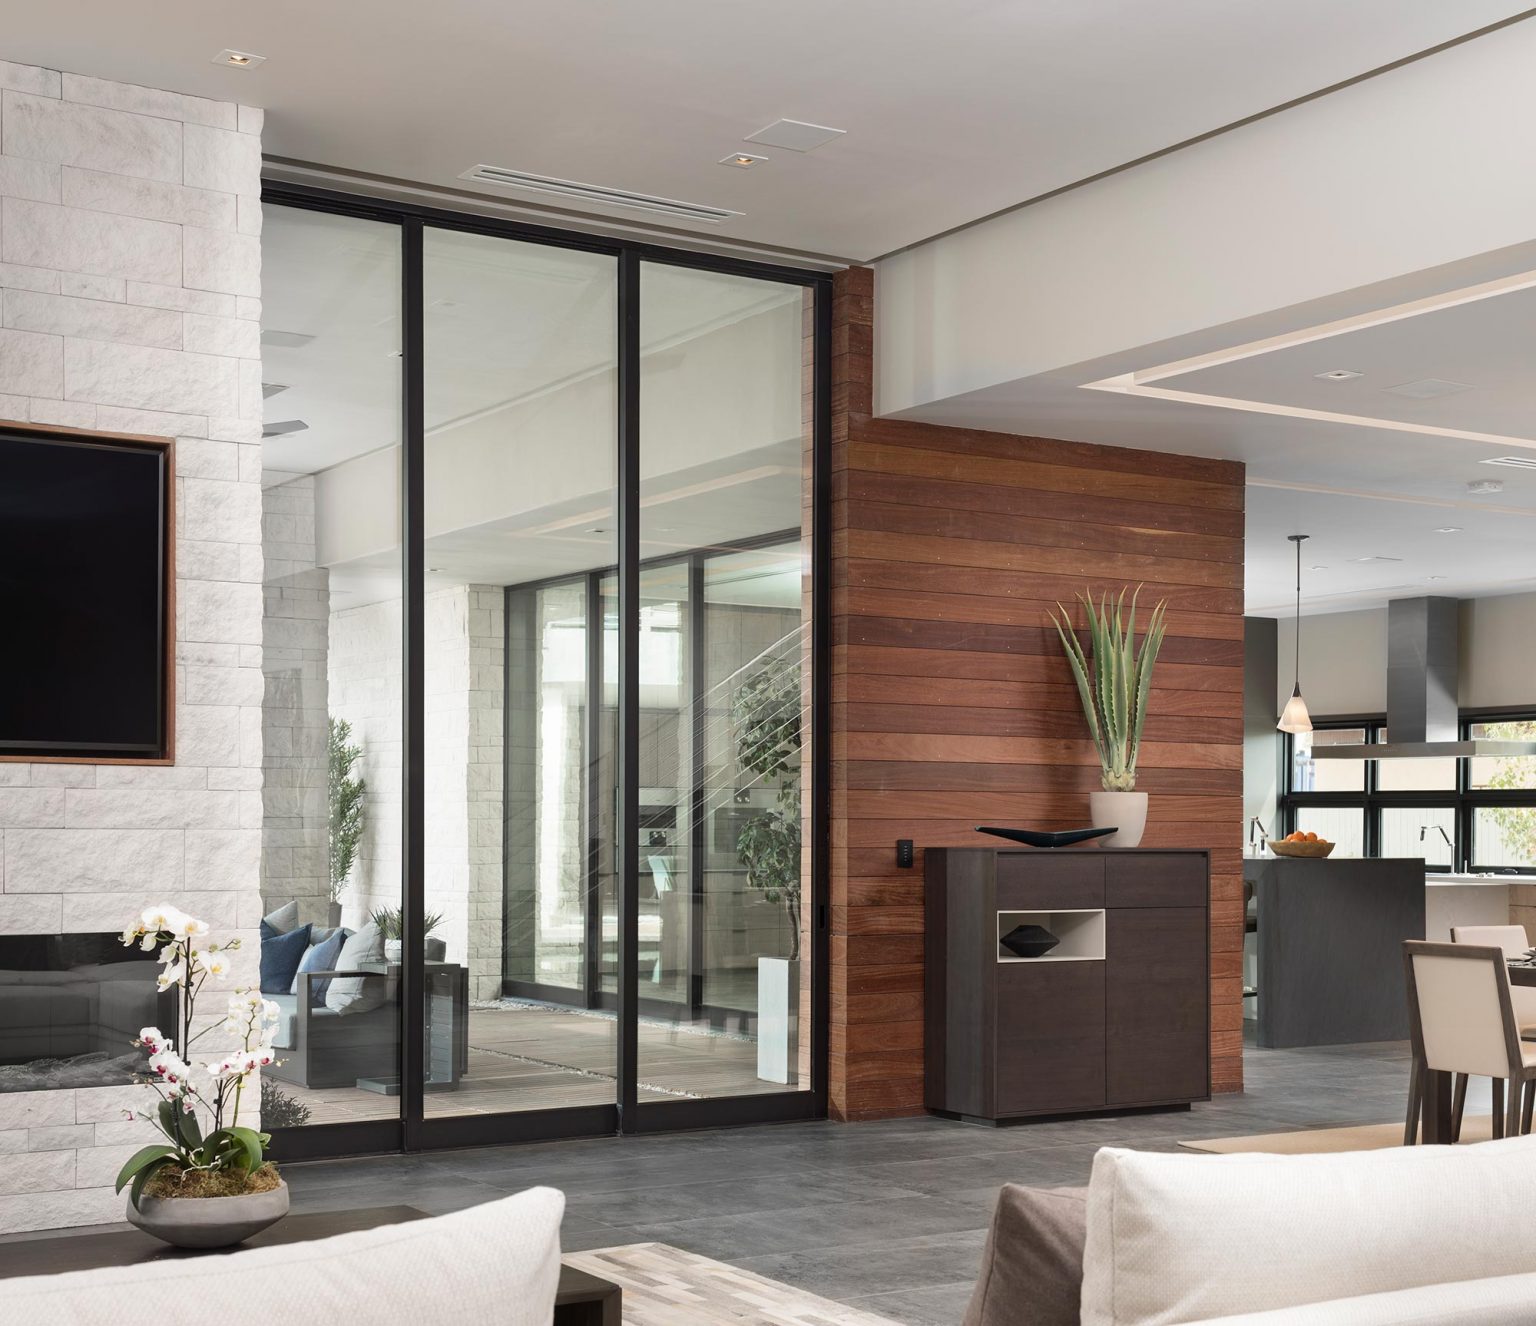 Sliding Doors in modern family room are used to separate one room from another.
